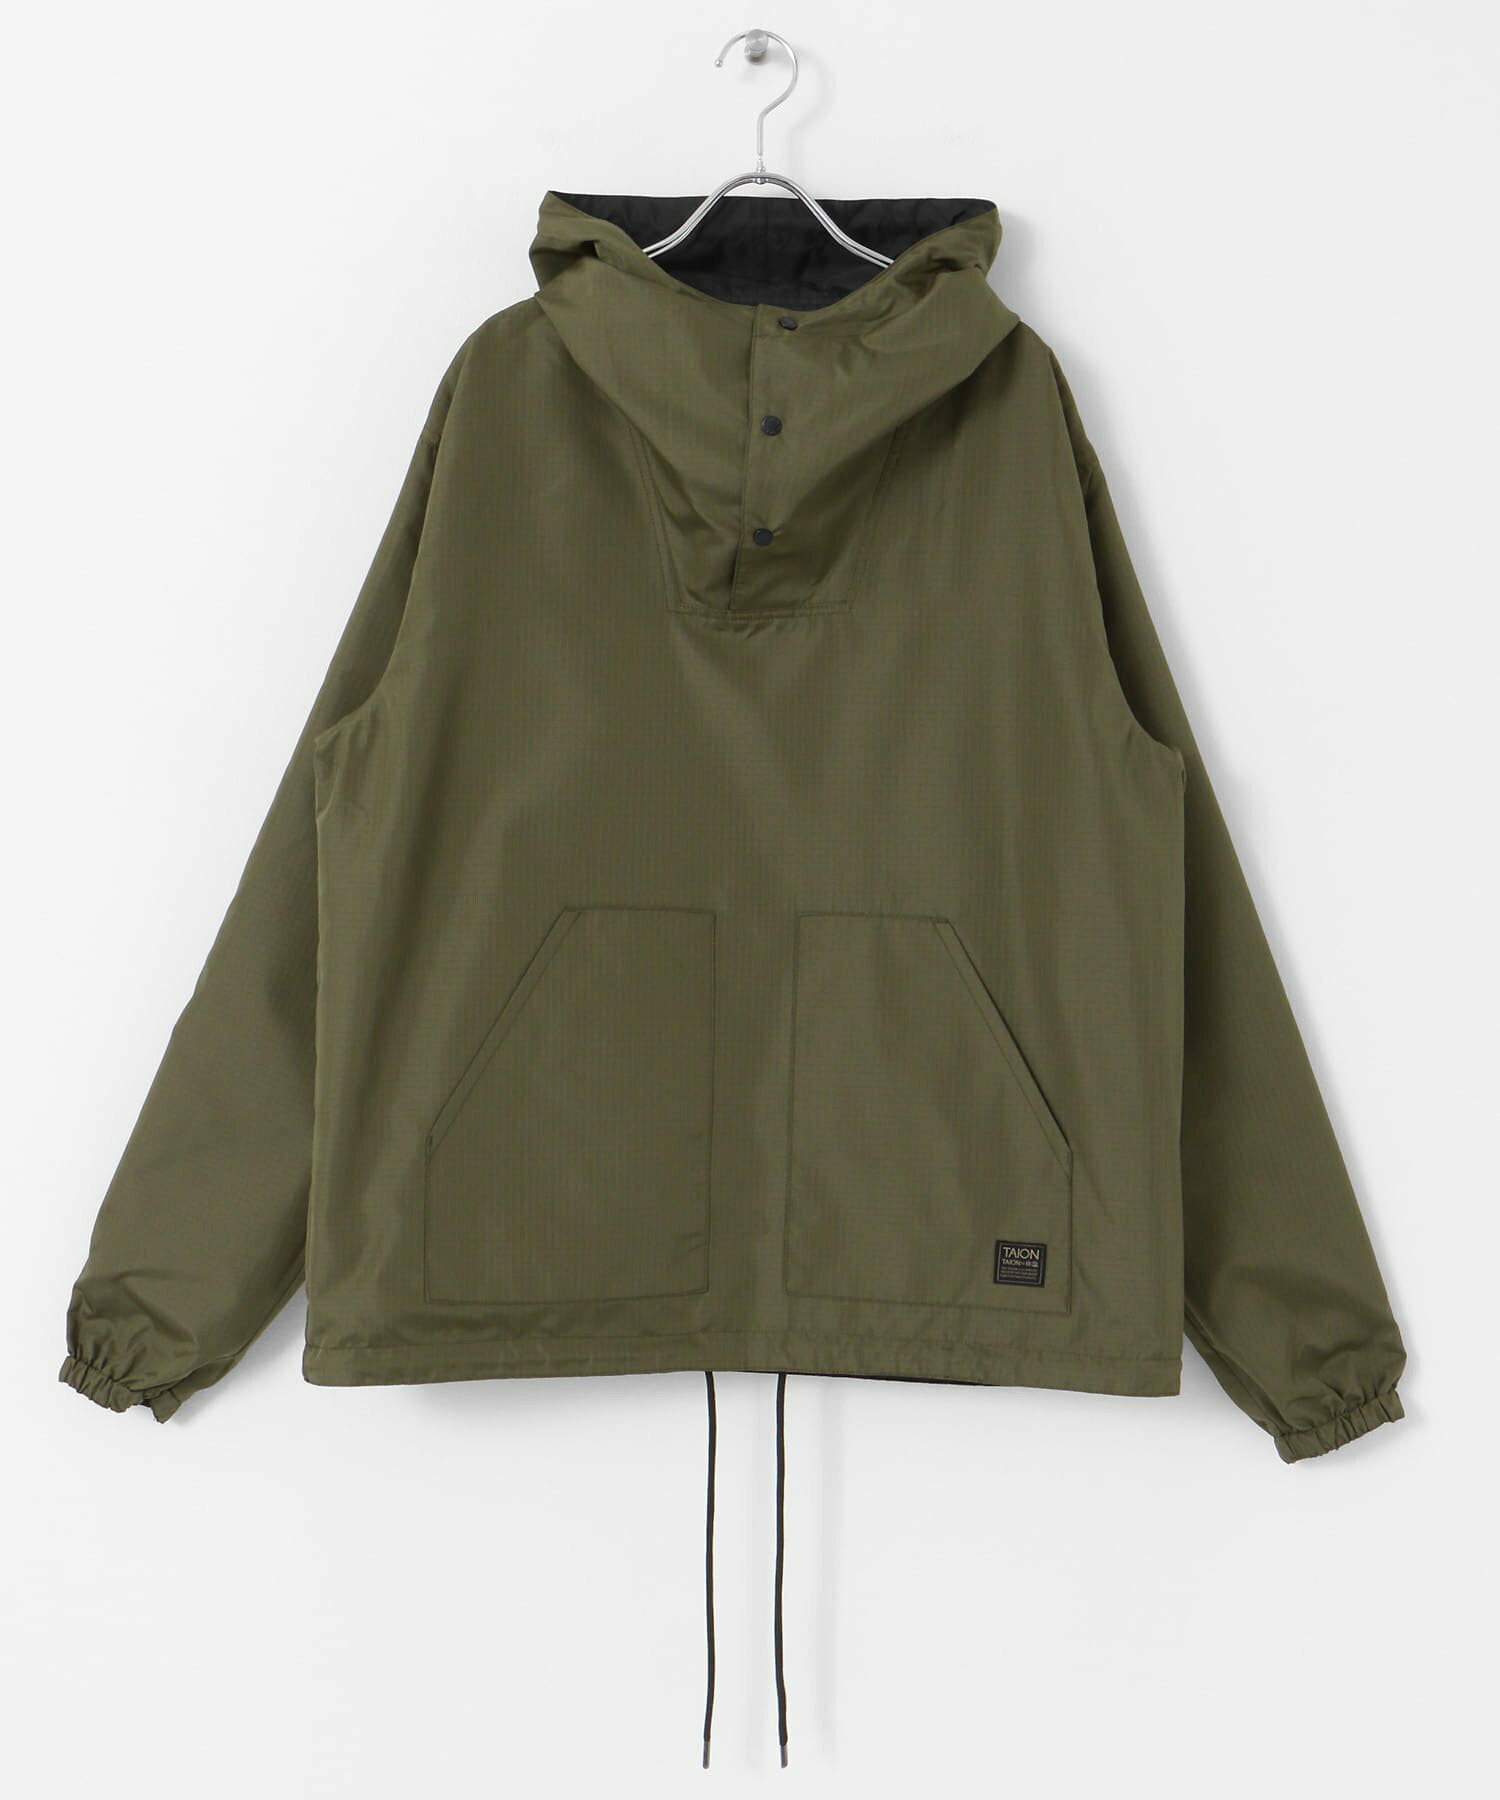 TAION Military Reversible Anorak